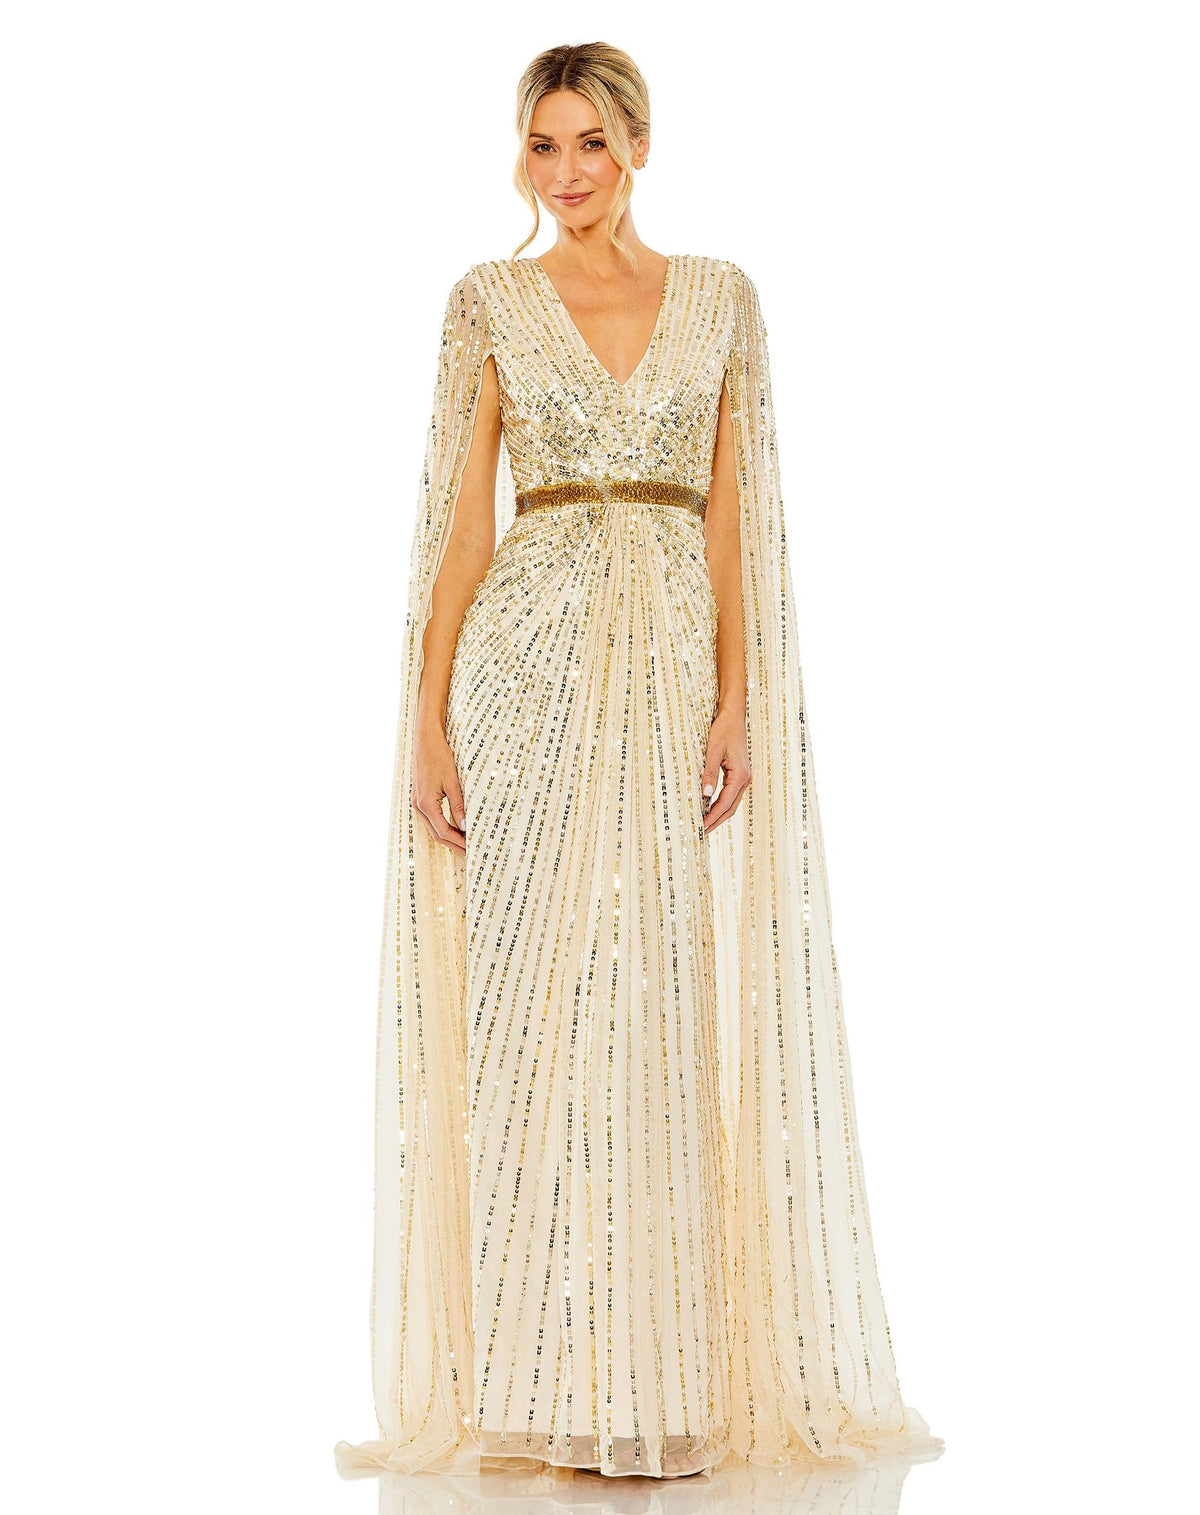 MAC DUGGAL, SEQUINED V-NECK GOWN WITH CAPE SLEEVES, Style #5803, NUDE